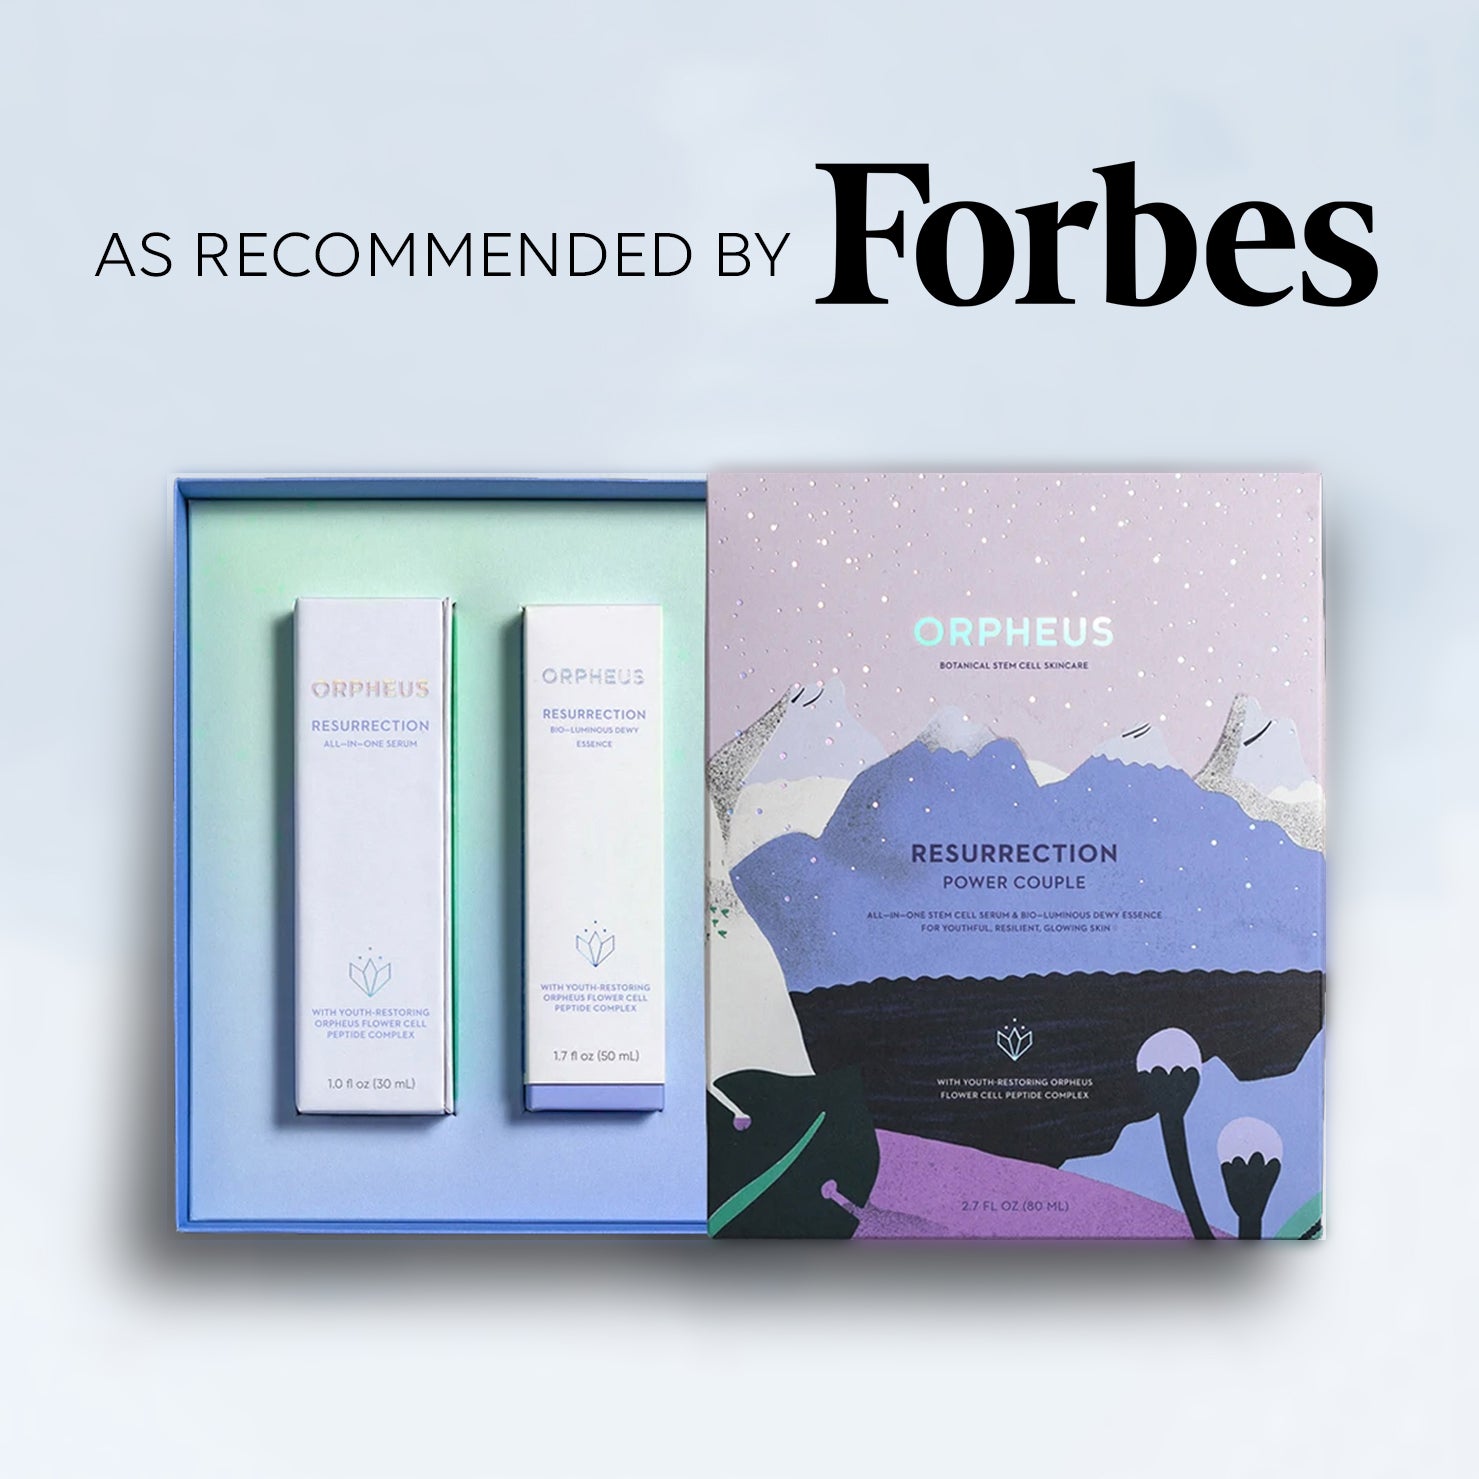 Serum and Essence recommended by Forbes.